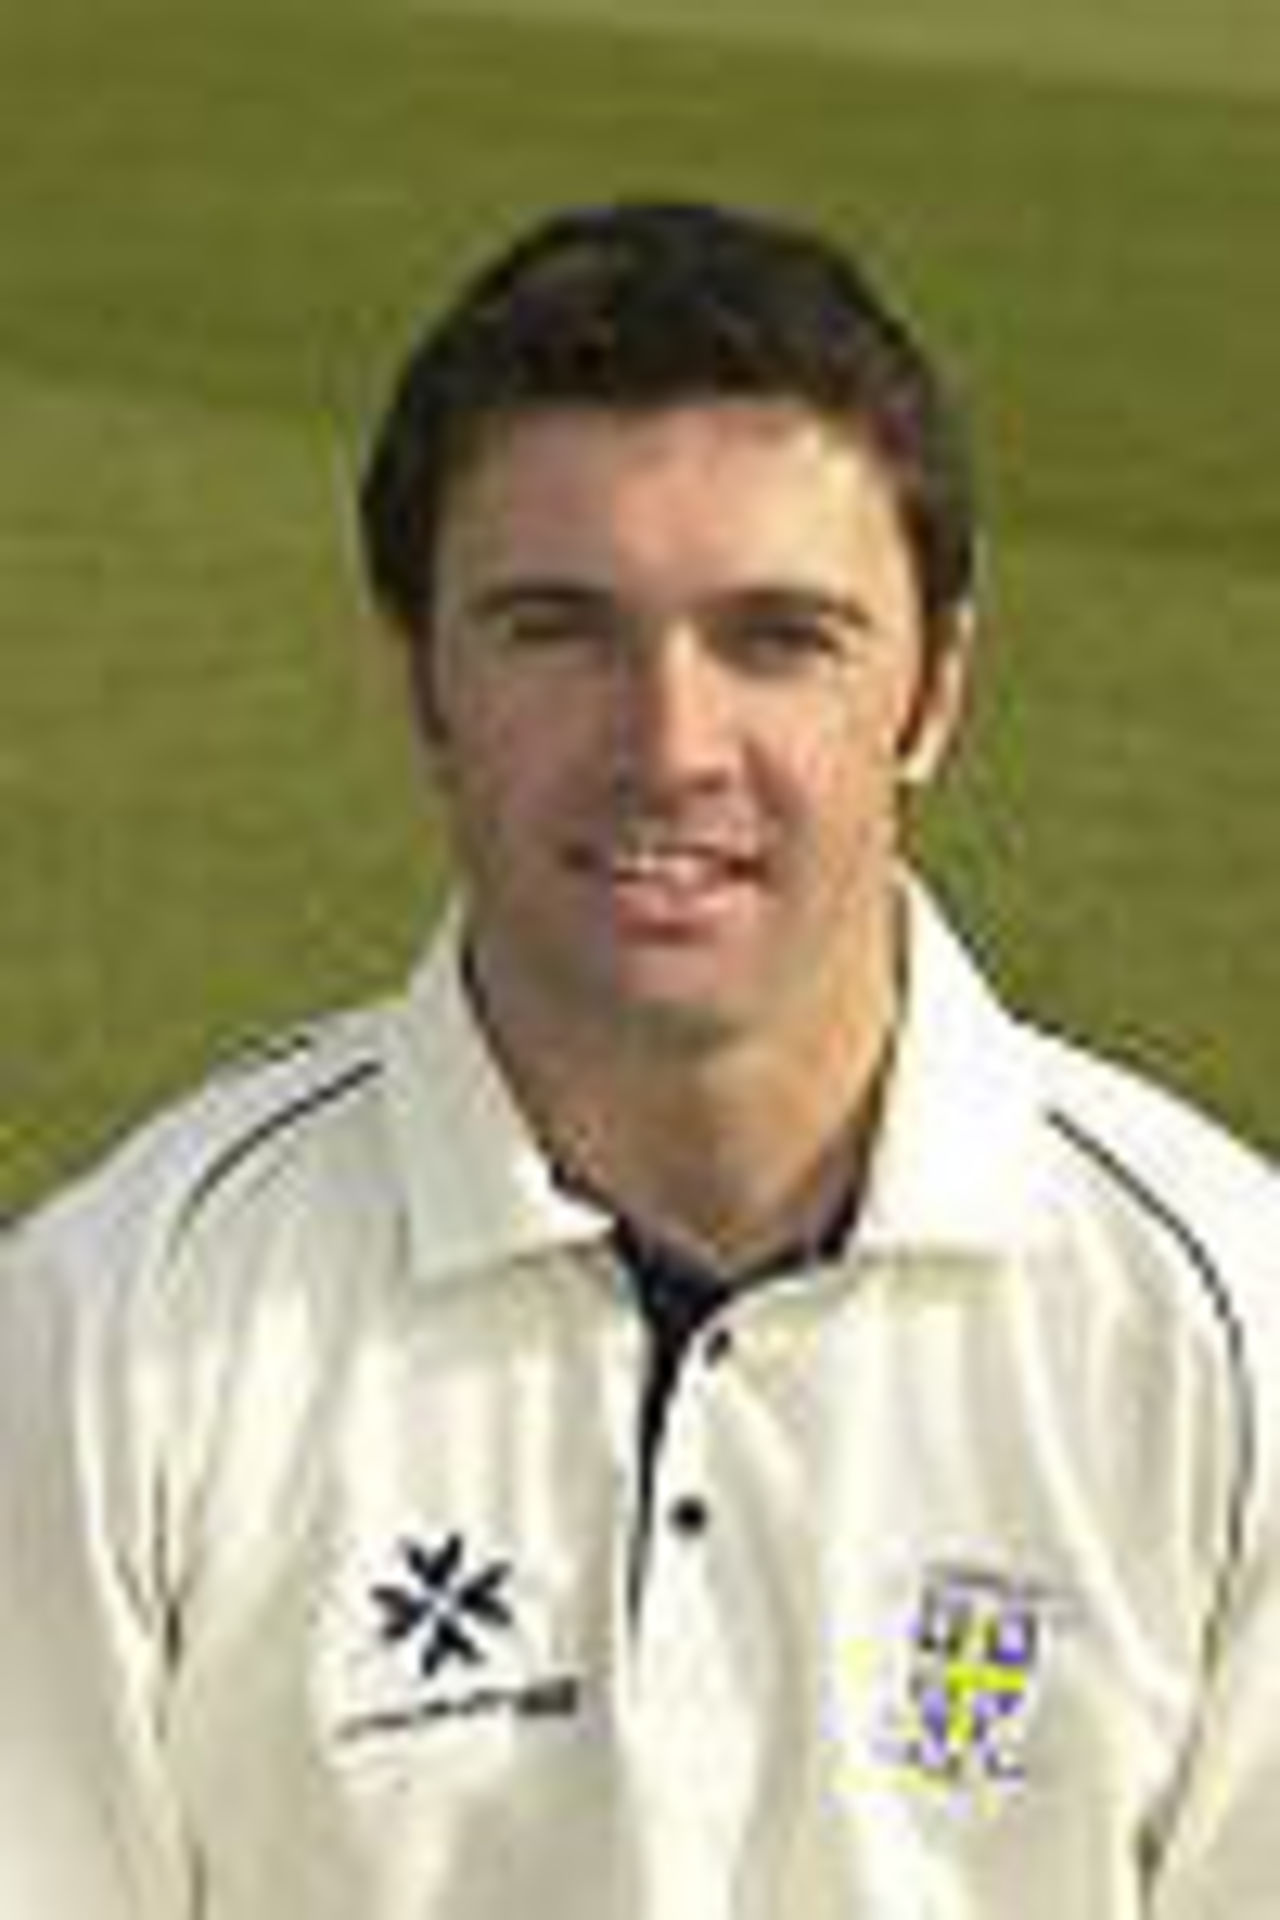 Taken at the 2002 Durham photocall